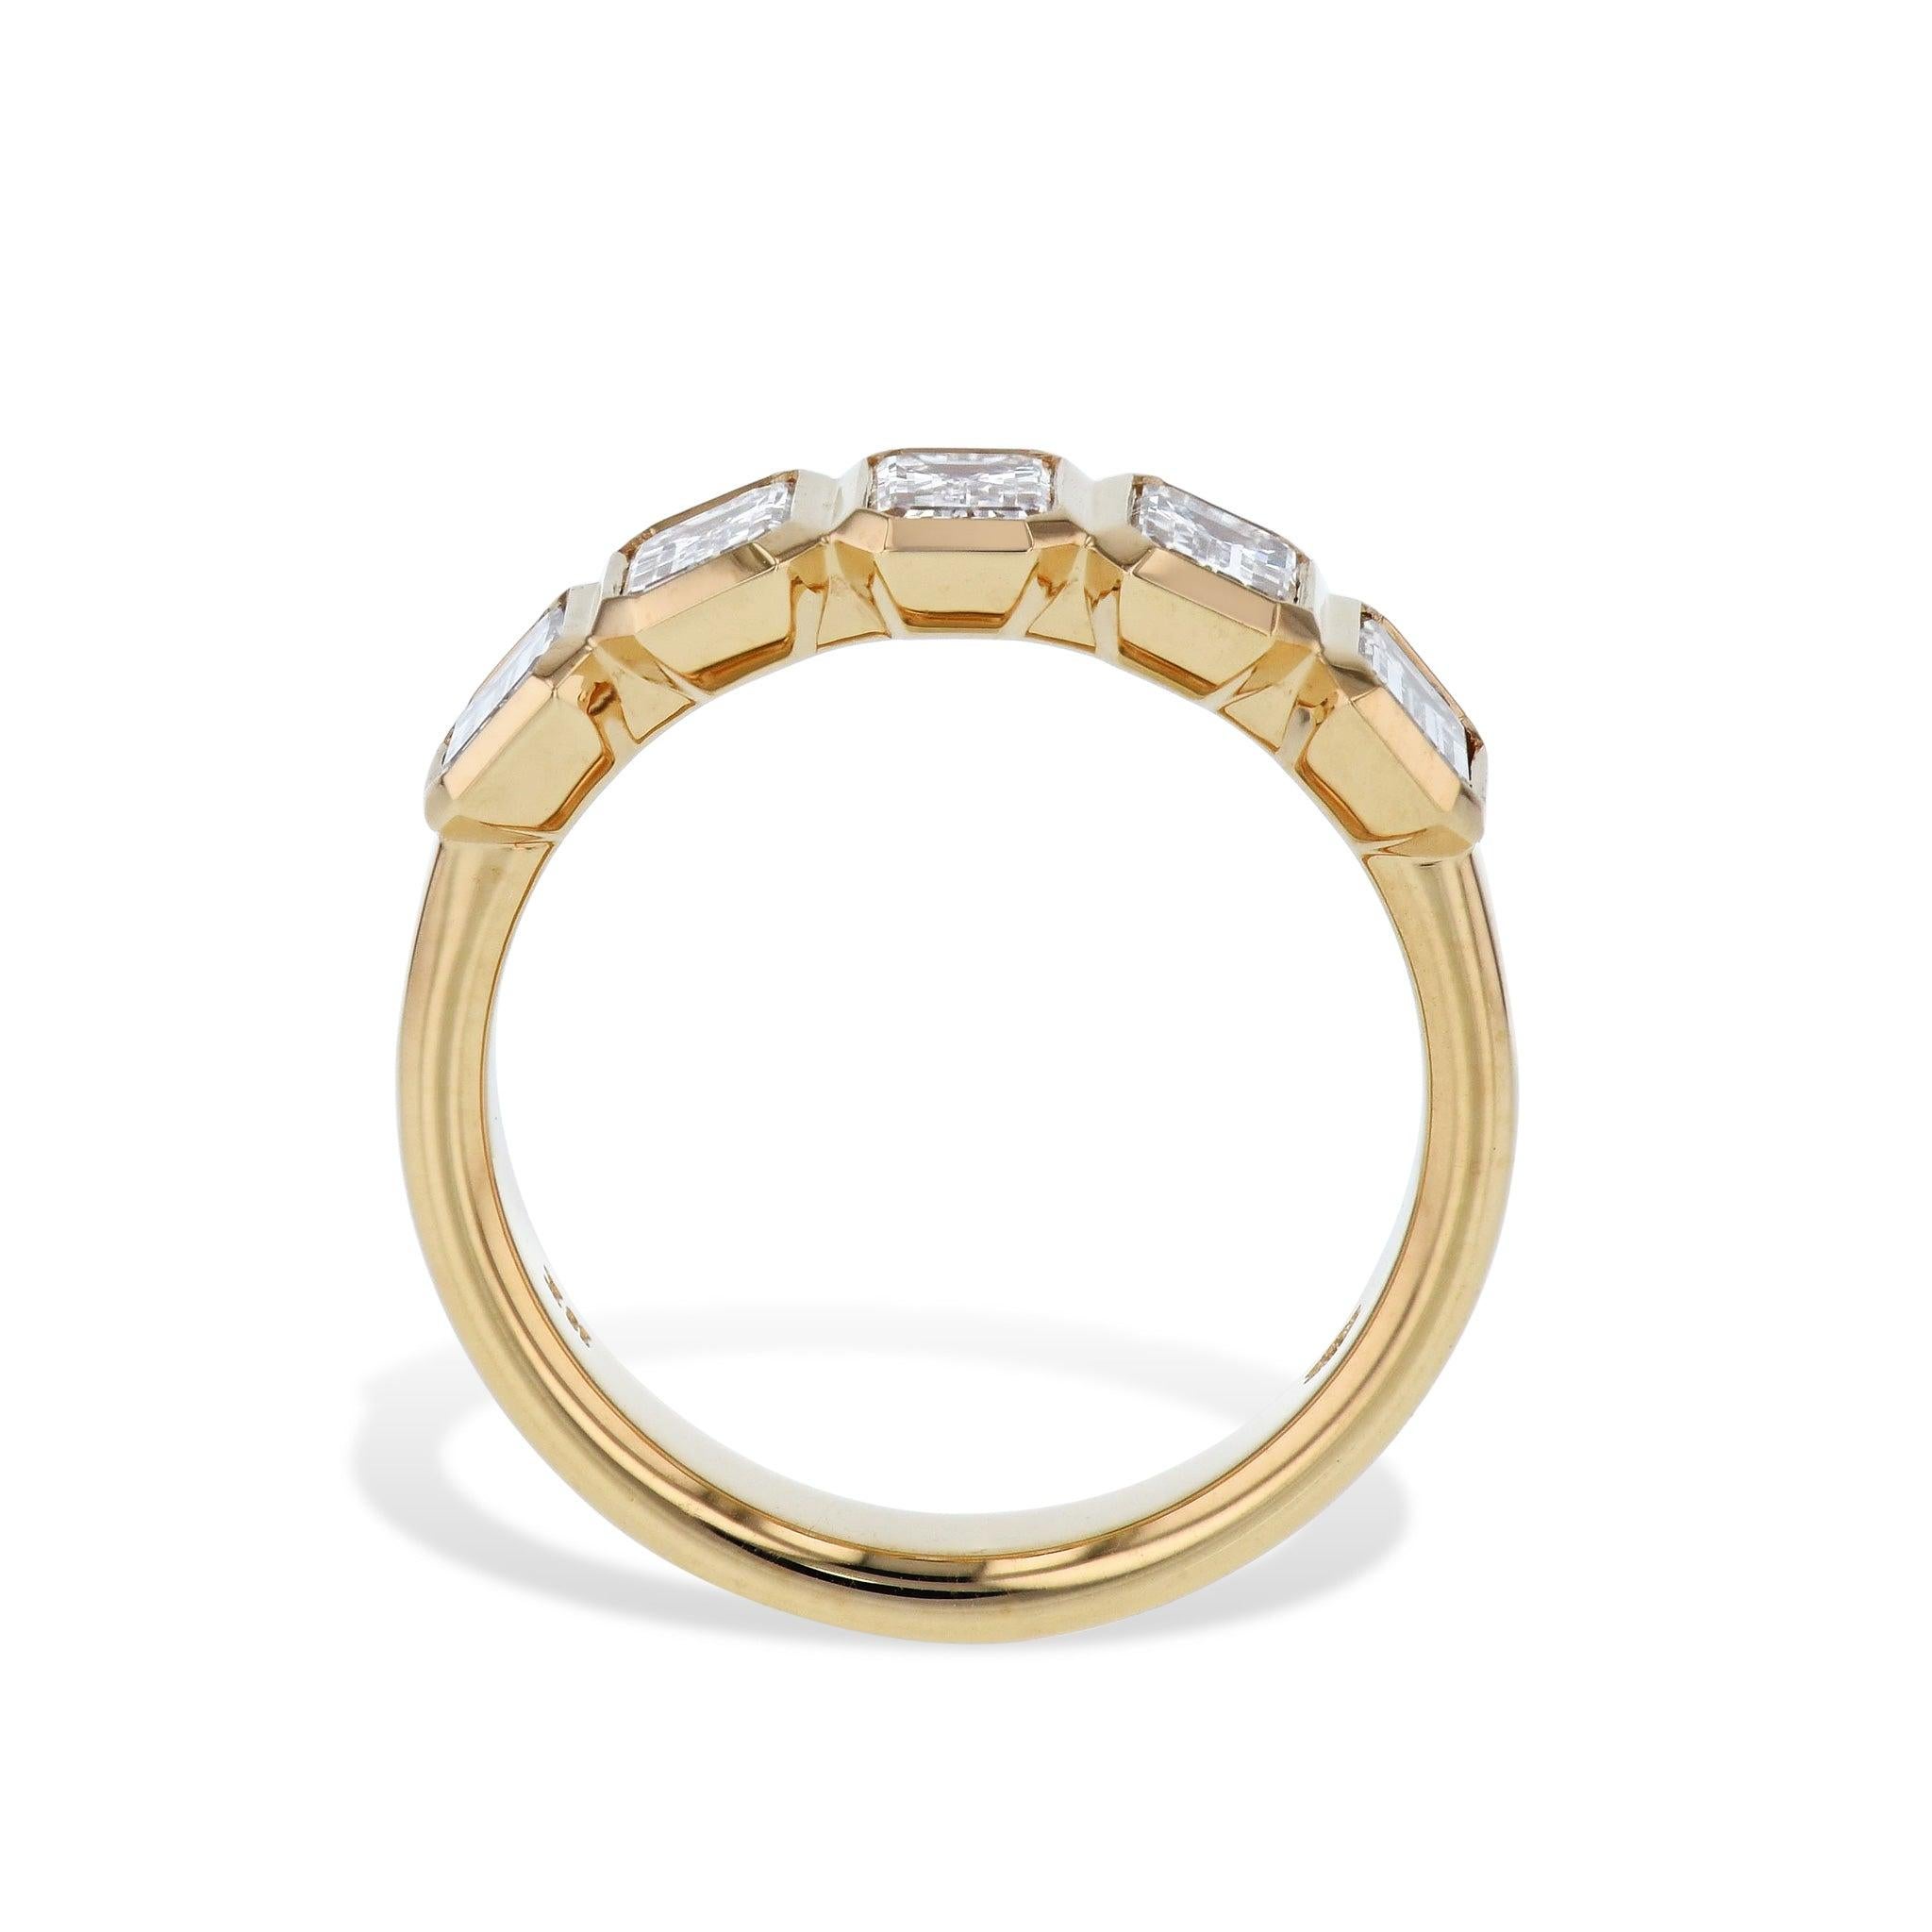 This sophisticated 18kt Yellow Gold Ring features a design that radiates elegance and finesse. It showcases 5 luminous Emerald Cut Diamonds, each with an average weight of 0.38ct, bezel set to perfection. Handmade by H&H Jewels, this ring is perfect